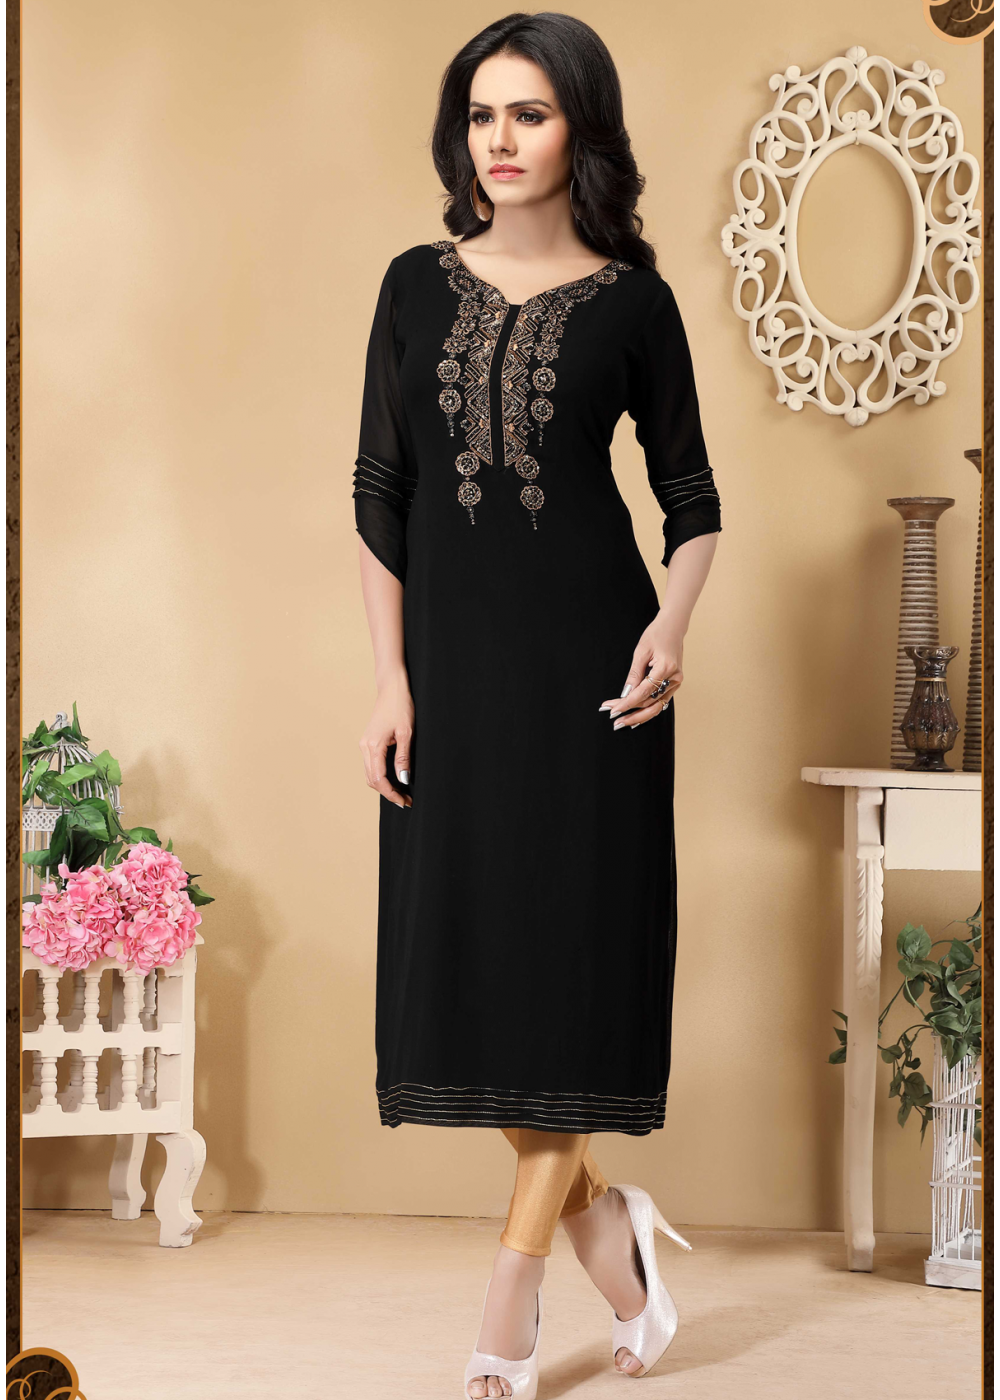 Party Wear Georgette Kurtis Online Shopping for Women at Low Prices